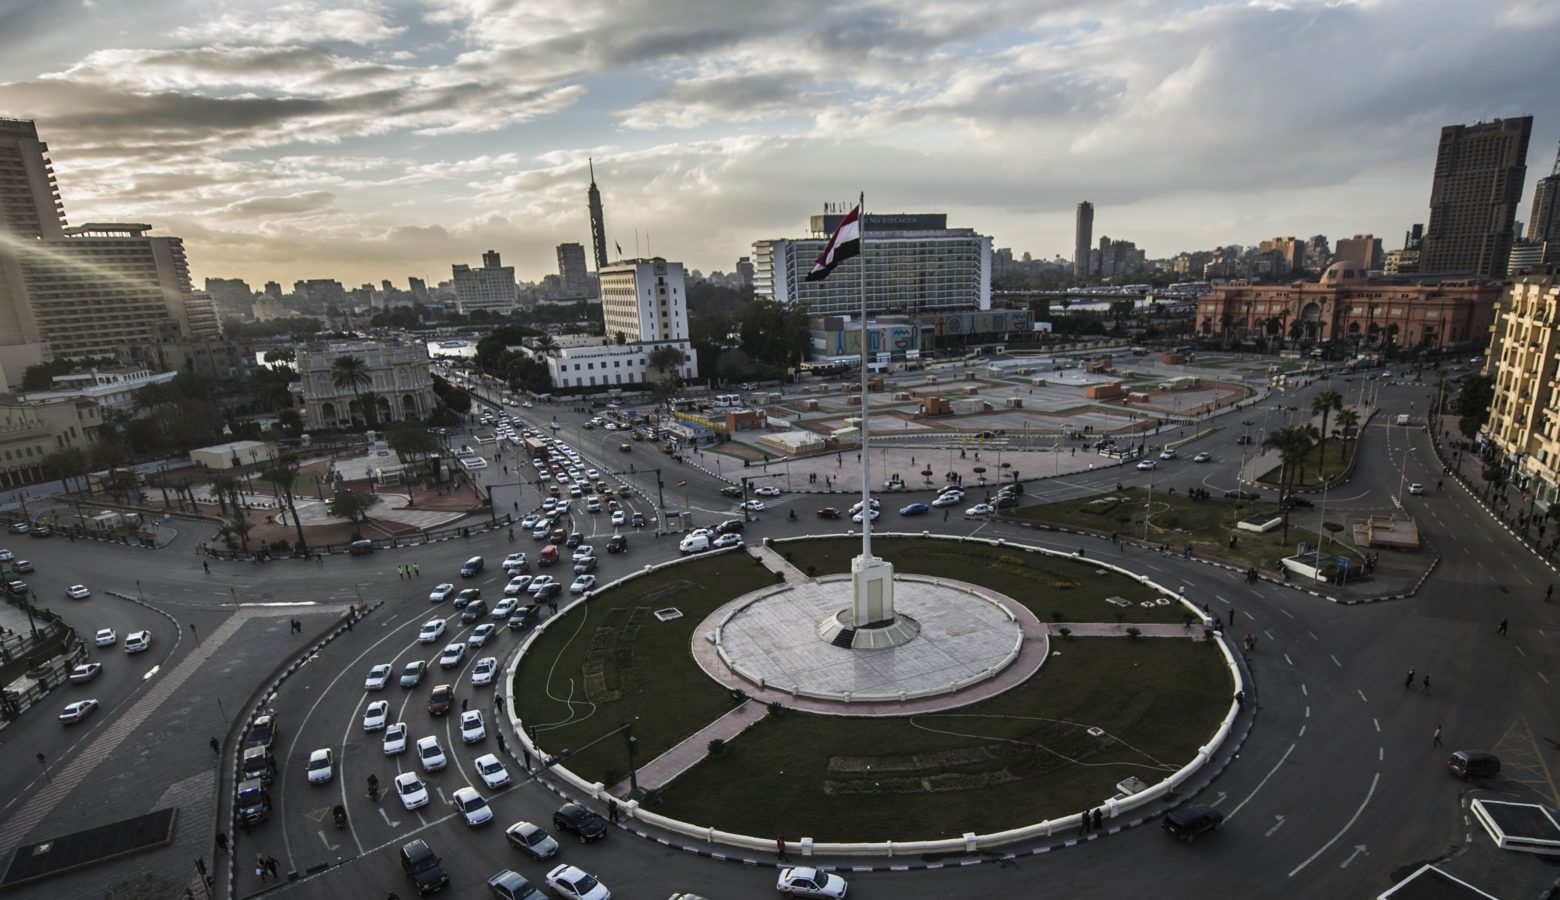 Cairo's Tahrir Square (seen here in January) isn't actually a square — it's a traffic circle. And today, years after it was the site of anti-government demonstrations, it's a beautifully manicured, sterile space.